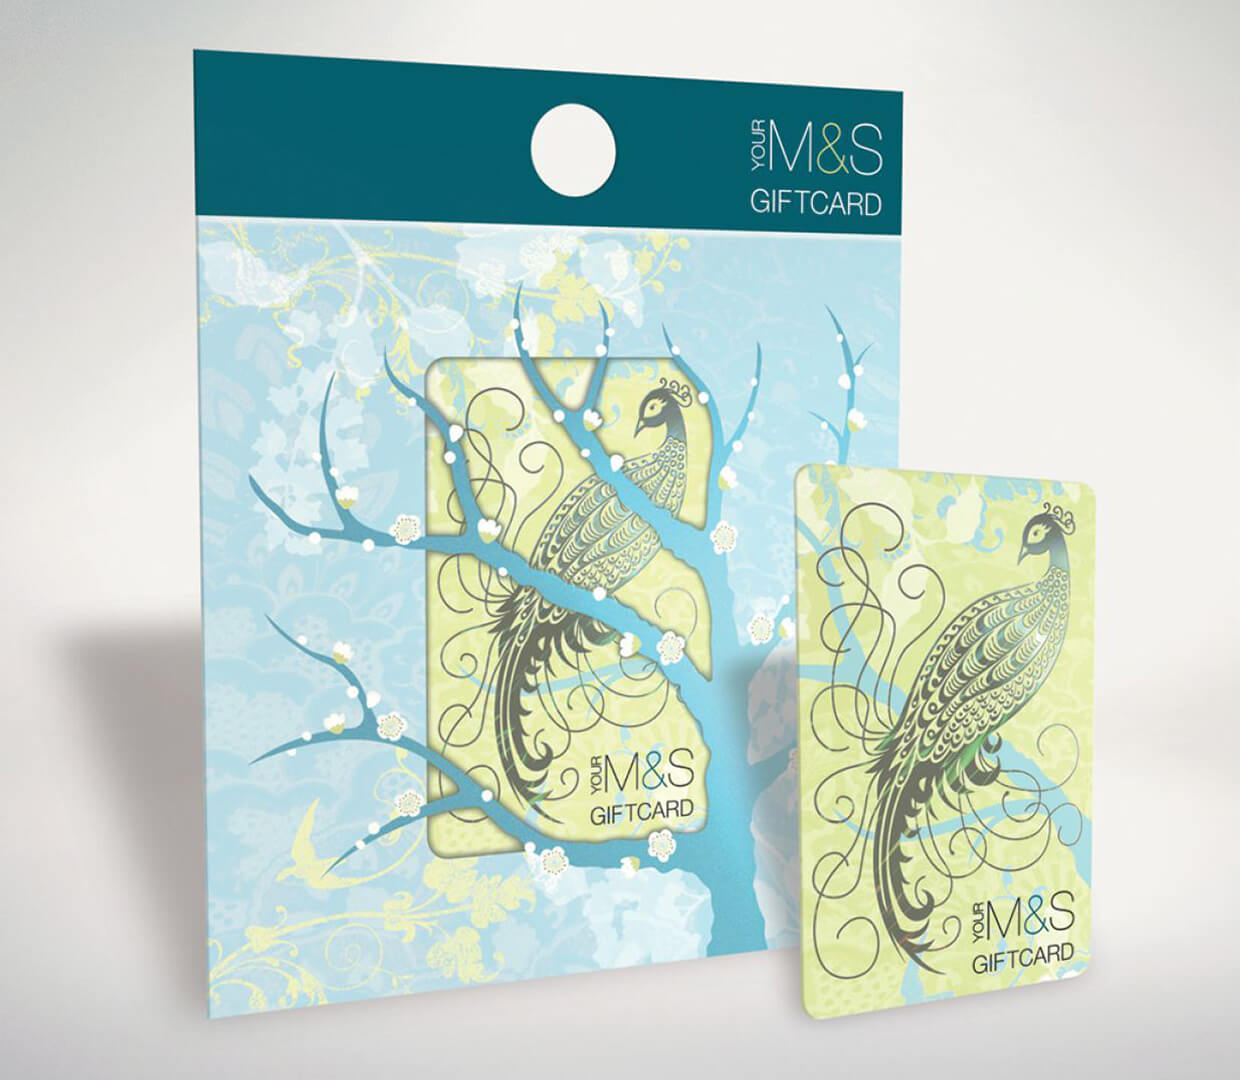 CPI CARD GROUP / M&S GIFT CARDS 